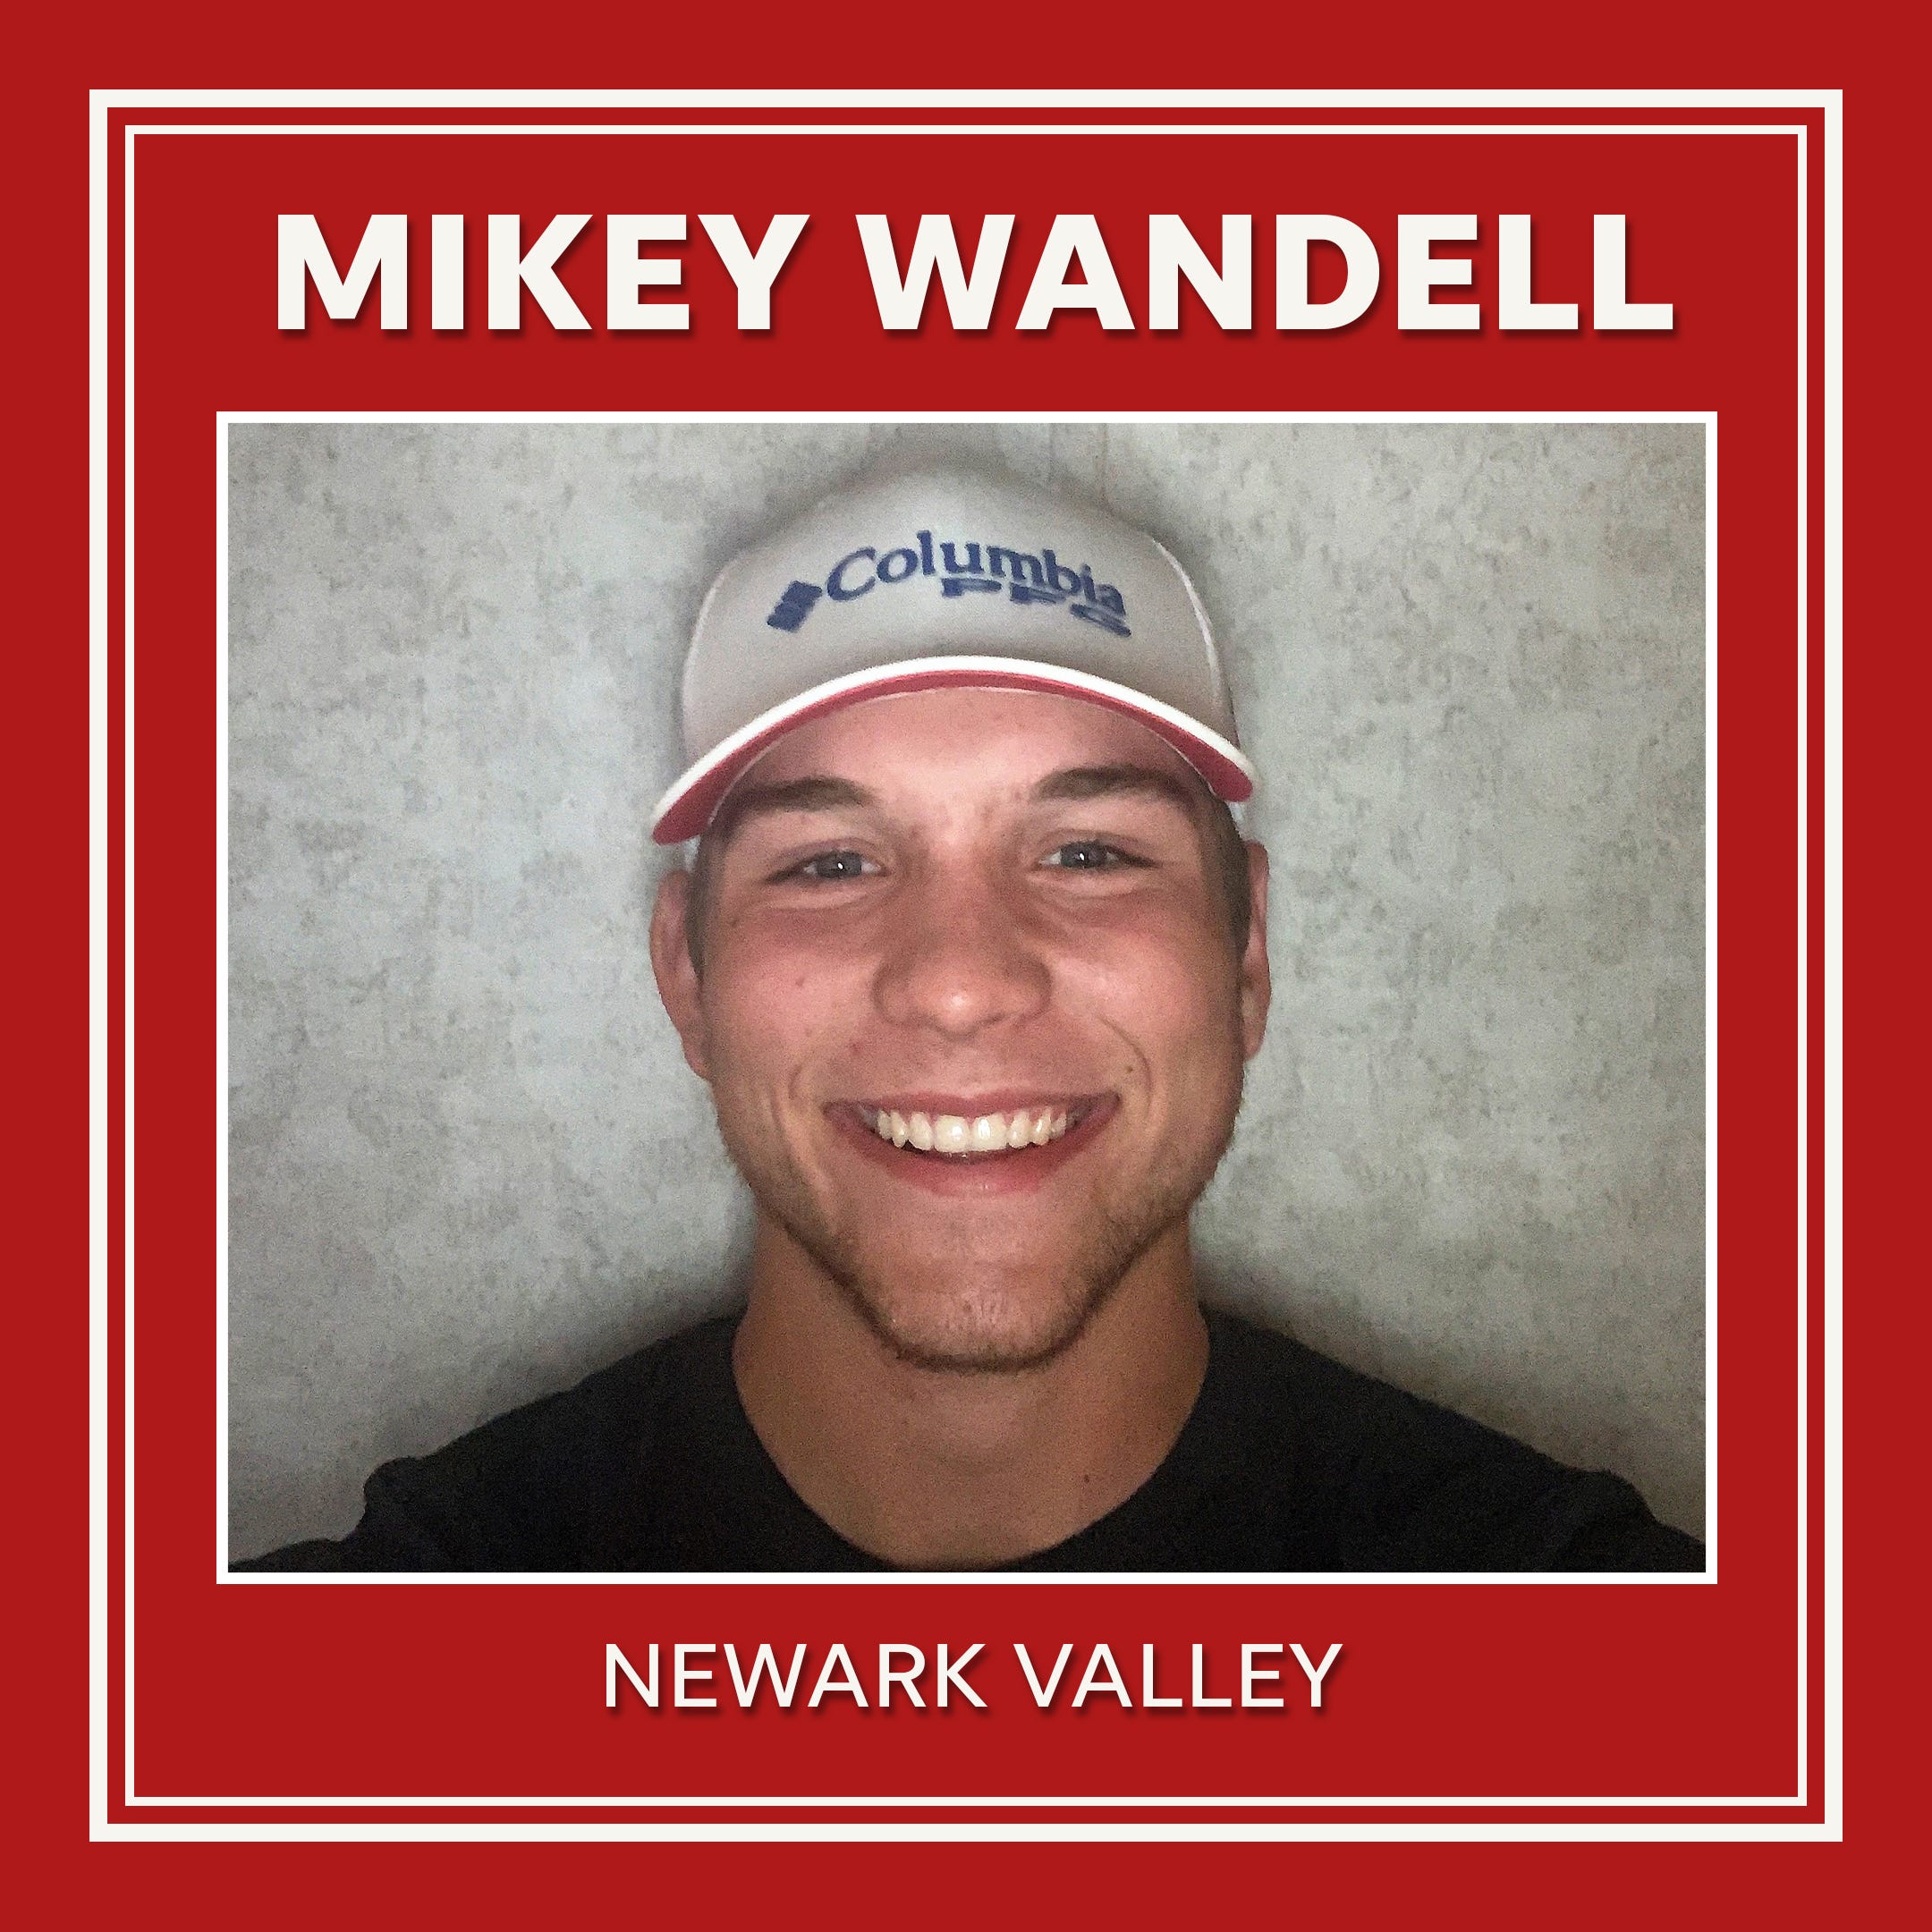 Mikey Wandell